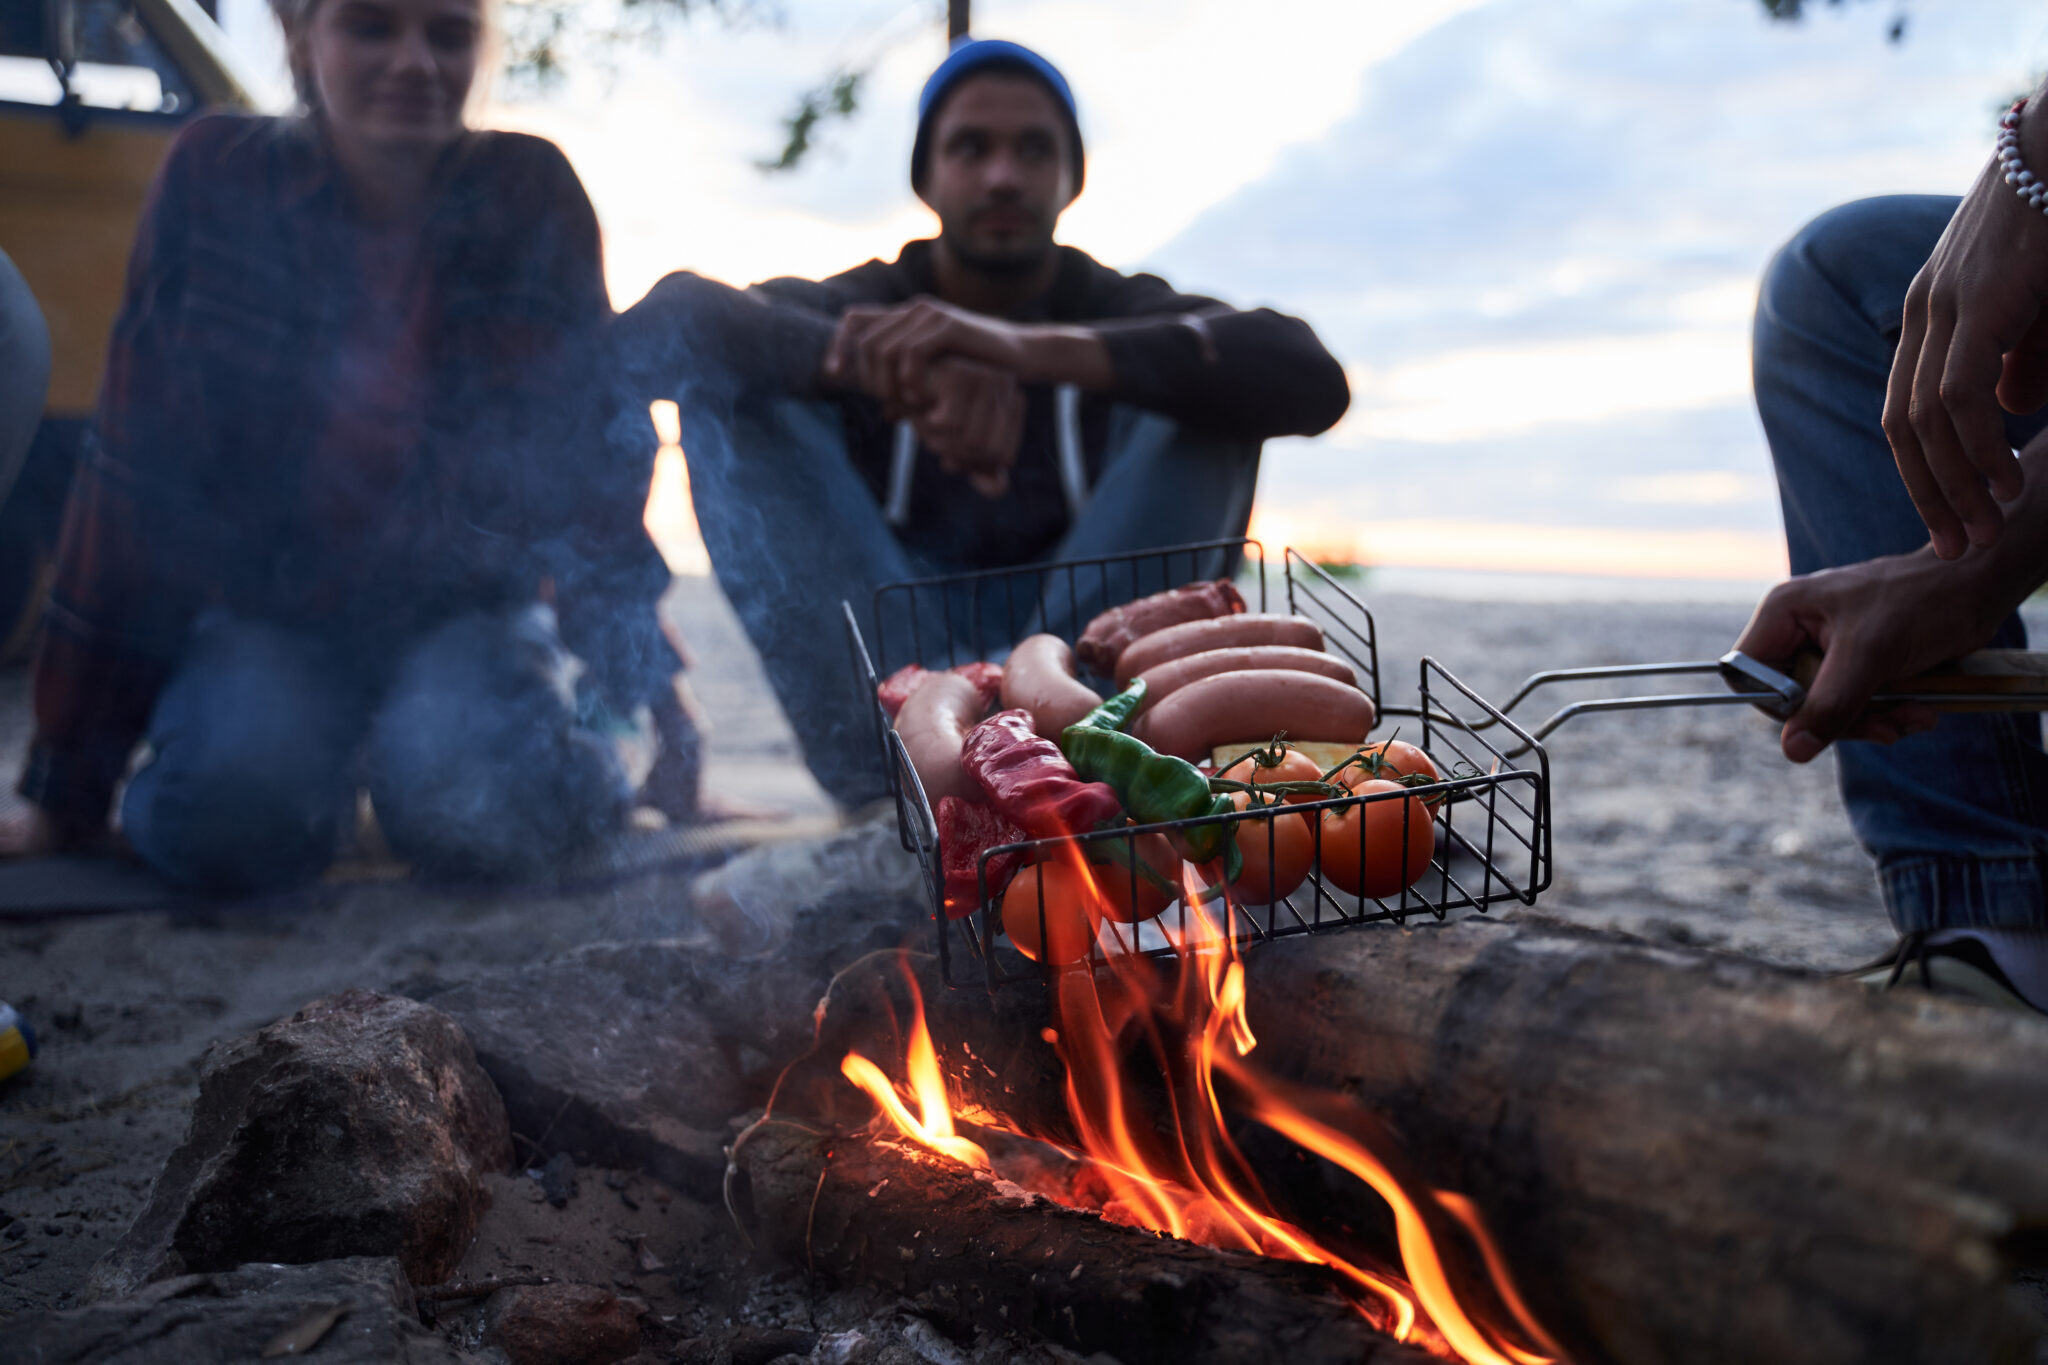 5 Easy Maine Seafood Recipes to Cook Over a Campfire